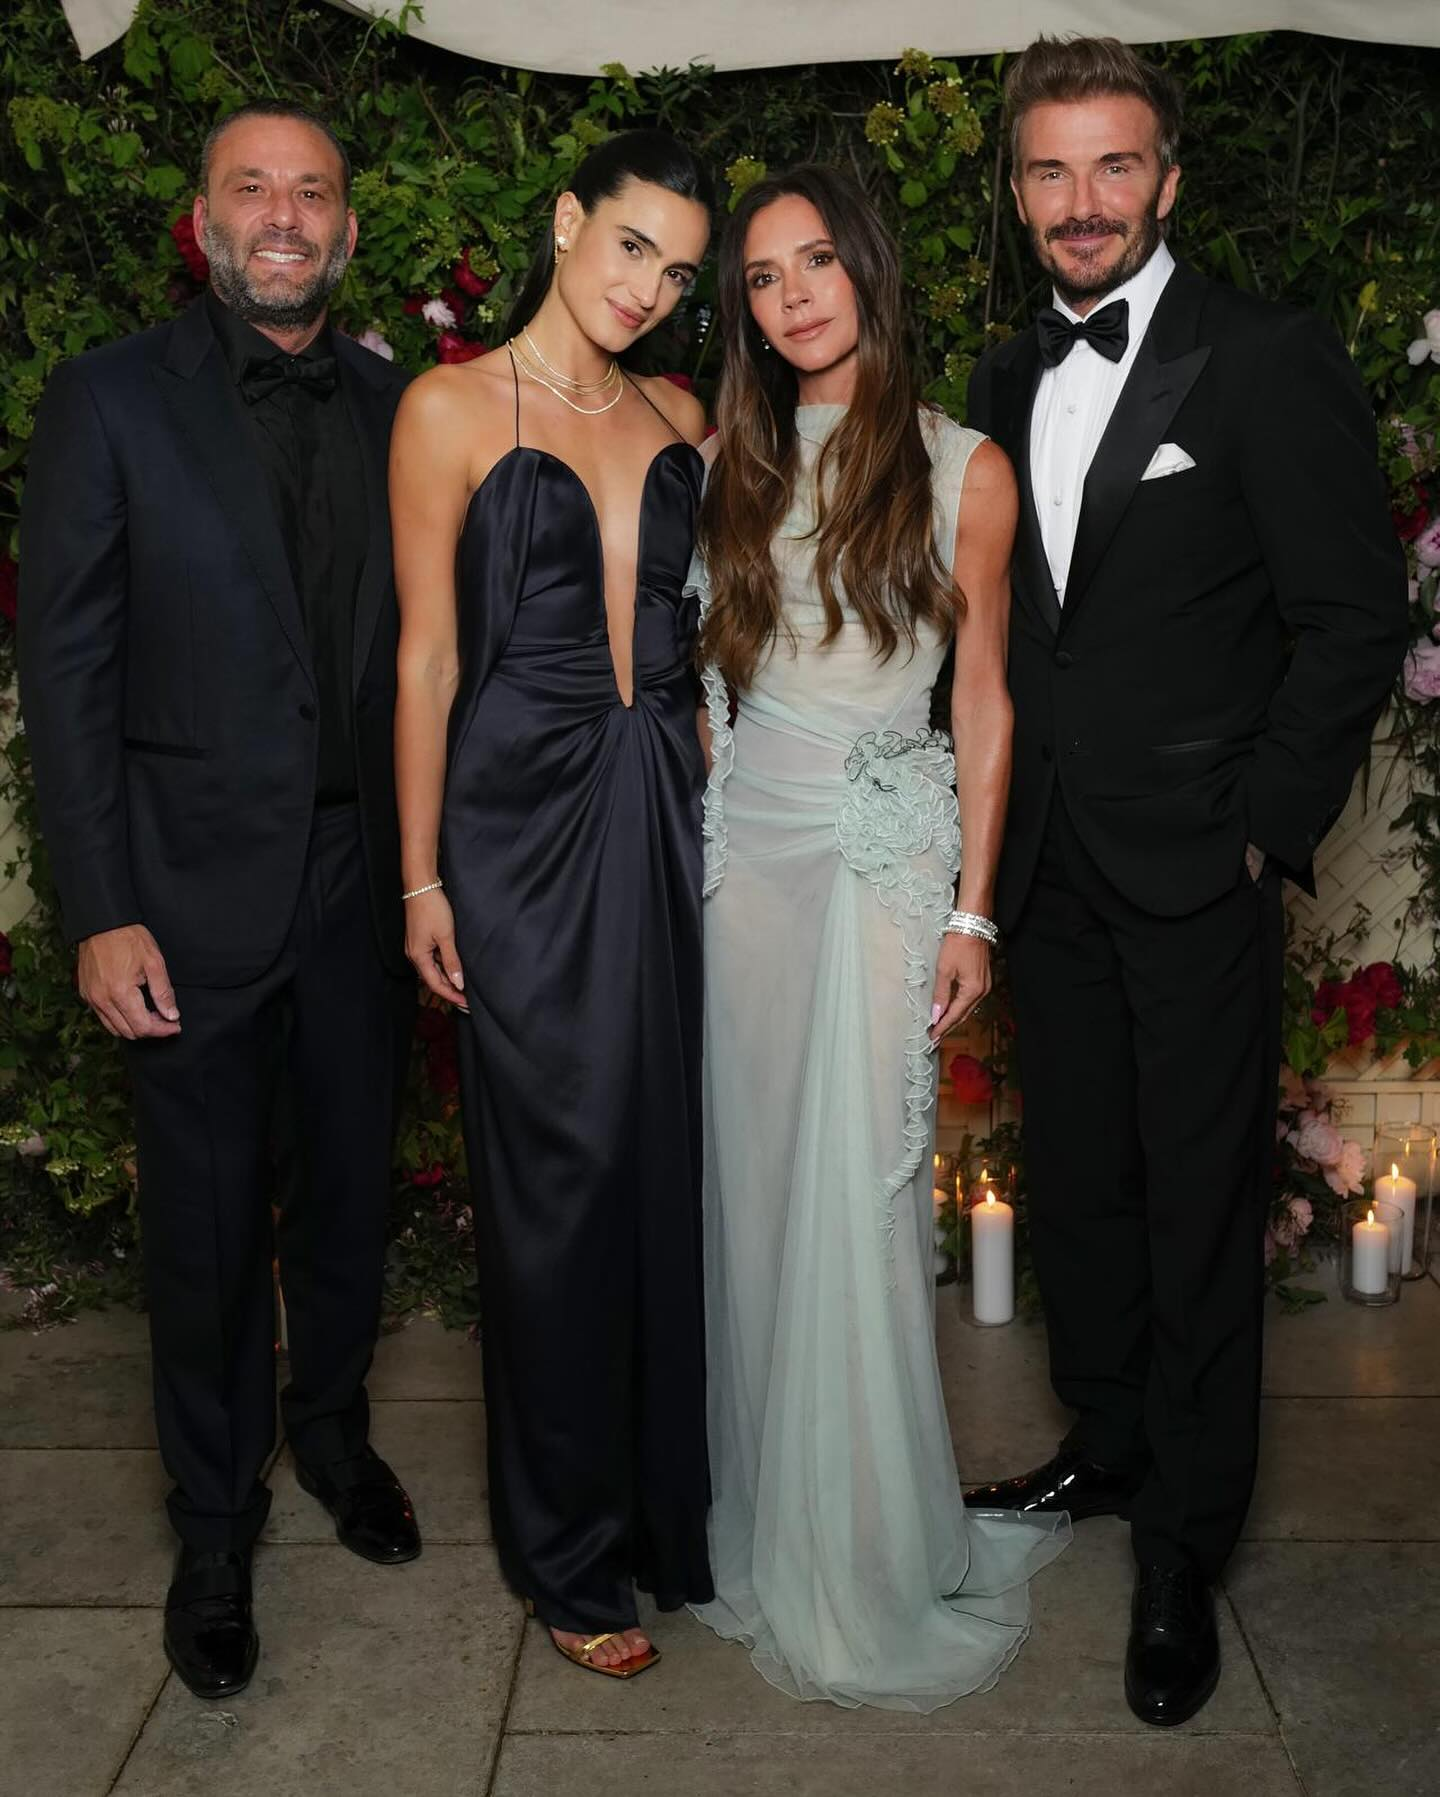 Wedding Guest Fashion: Get Inspired By Victoria Beckham's 50th Birthday Outfits